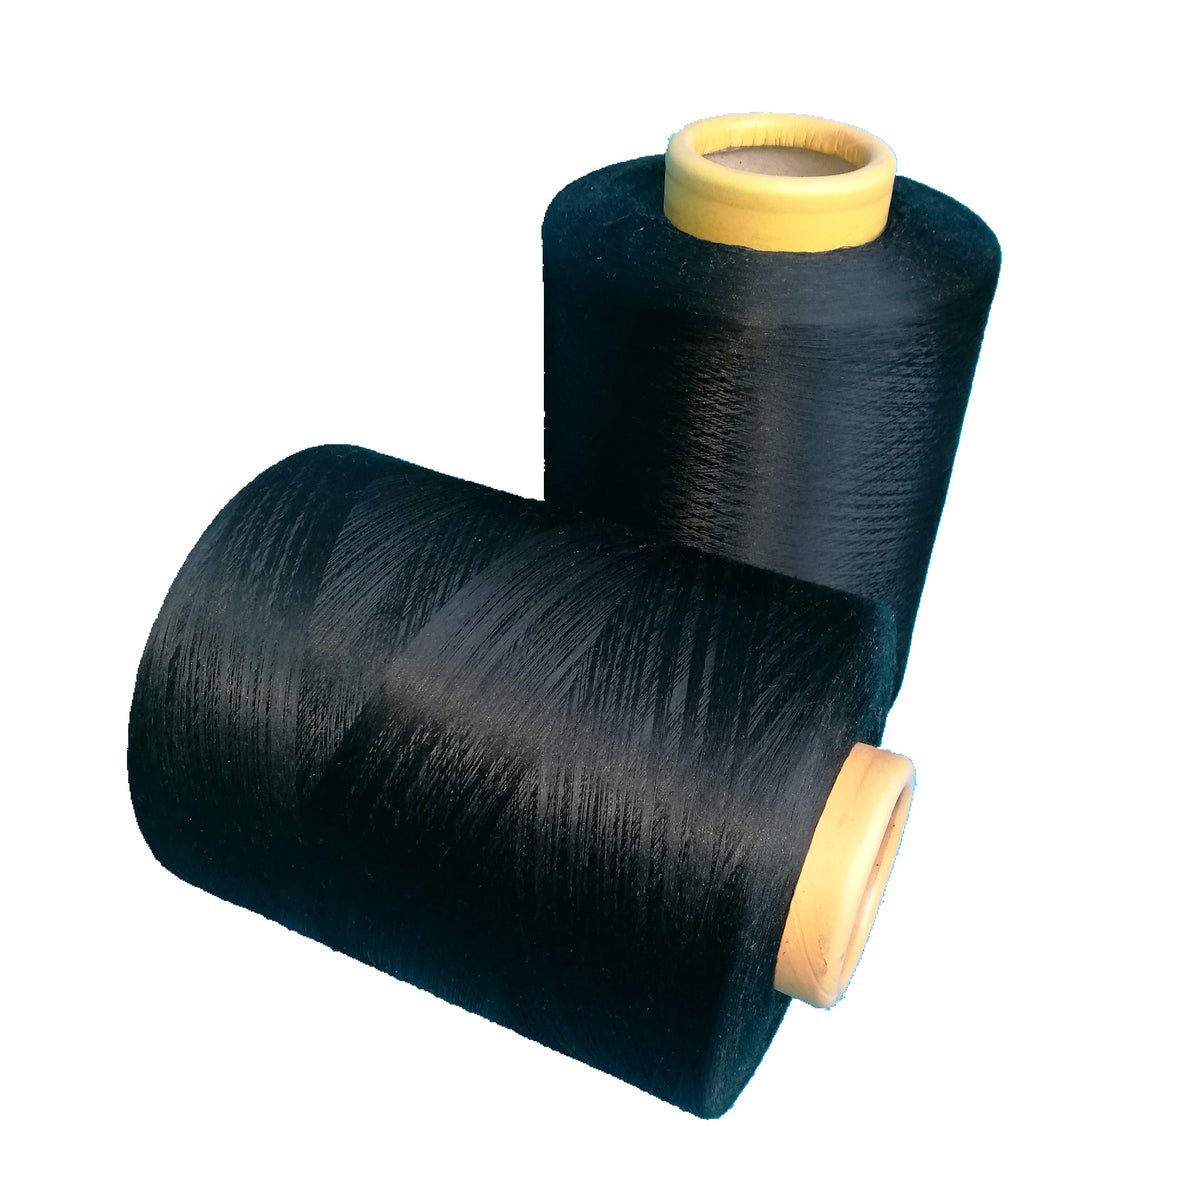 Two Cone of Black Copper Polyester Yarns